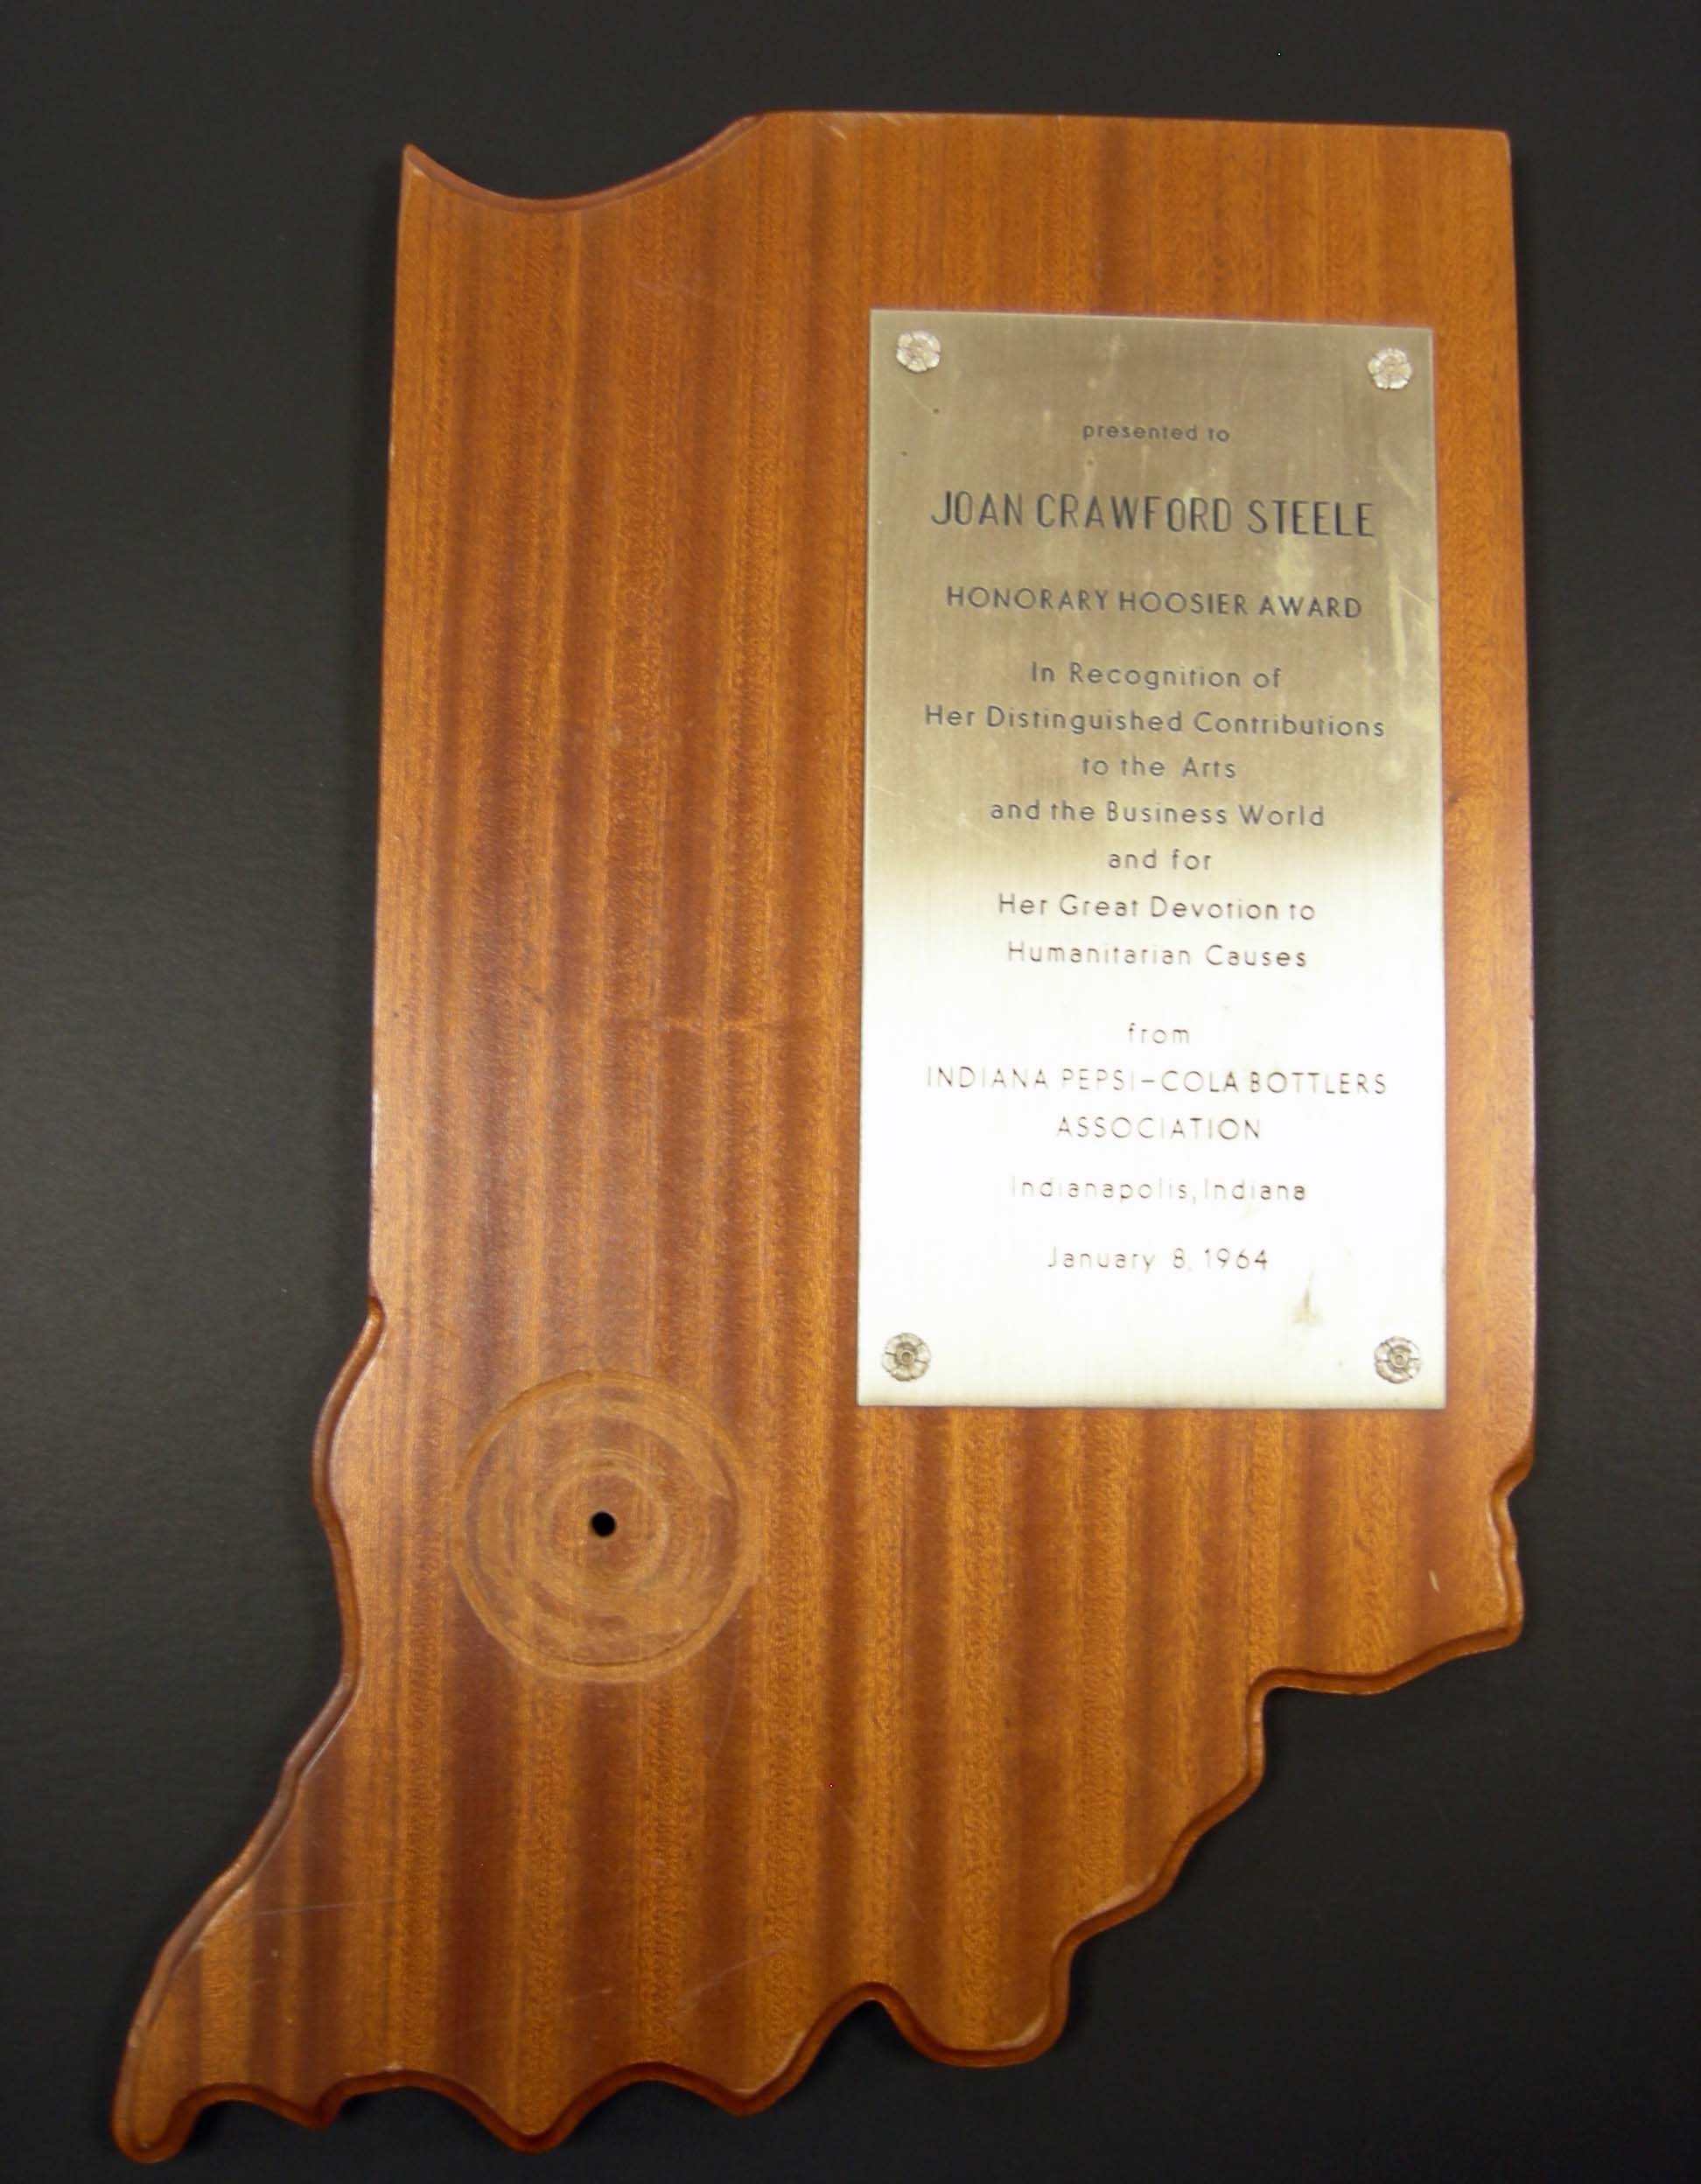 Award plaque in the shape of Indiana